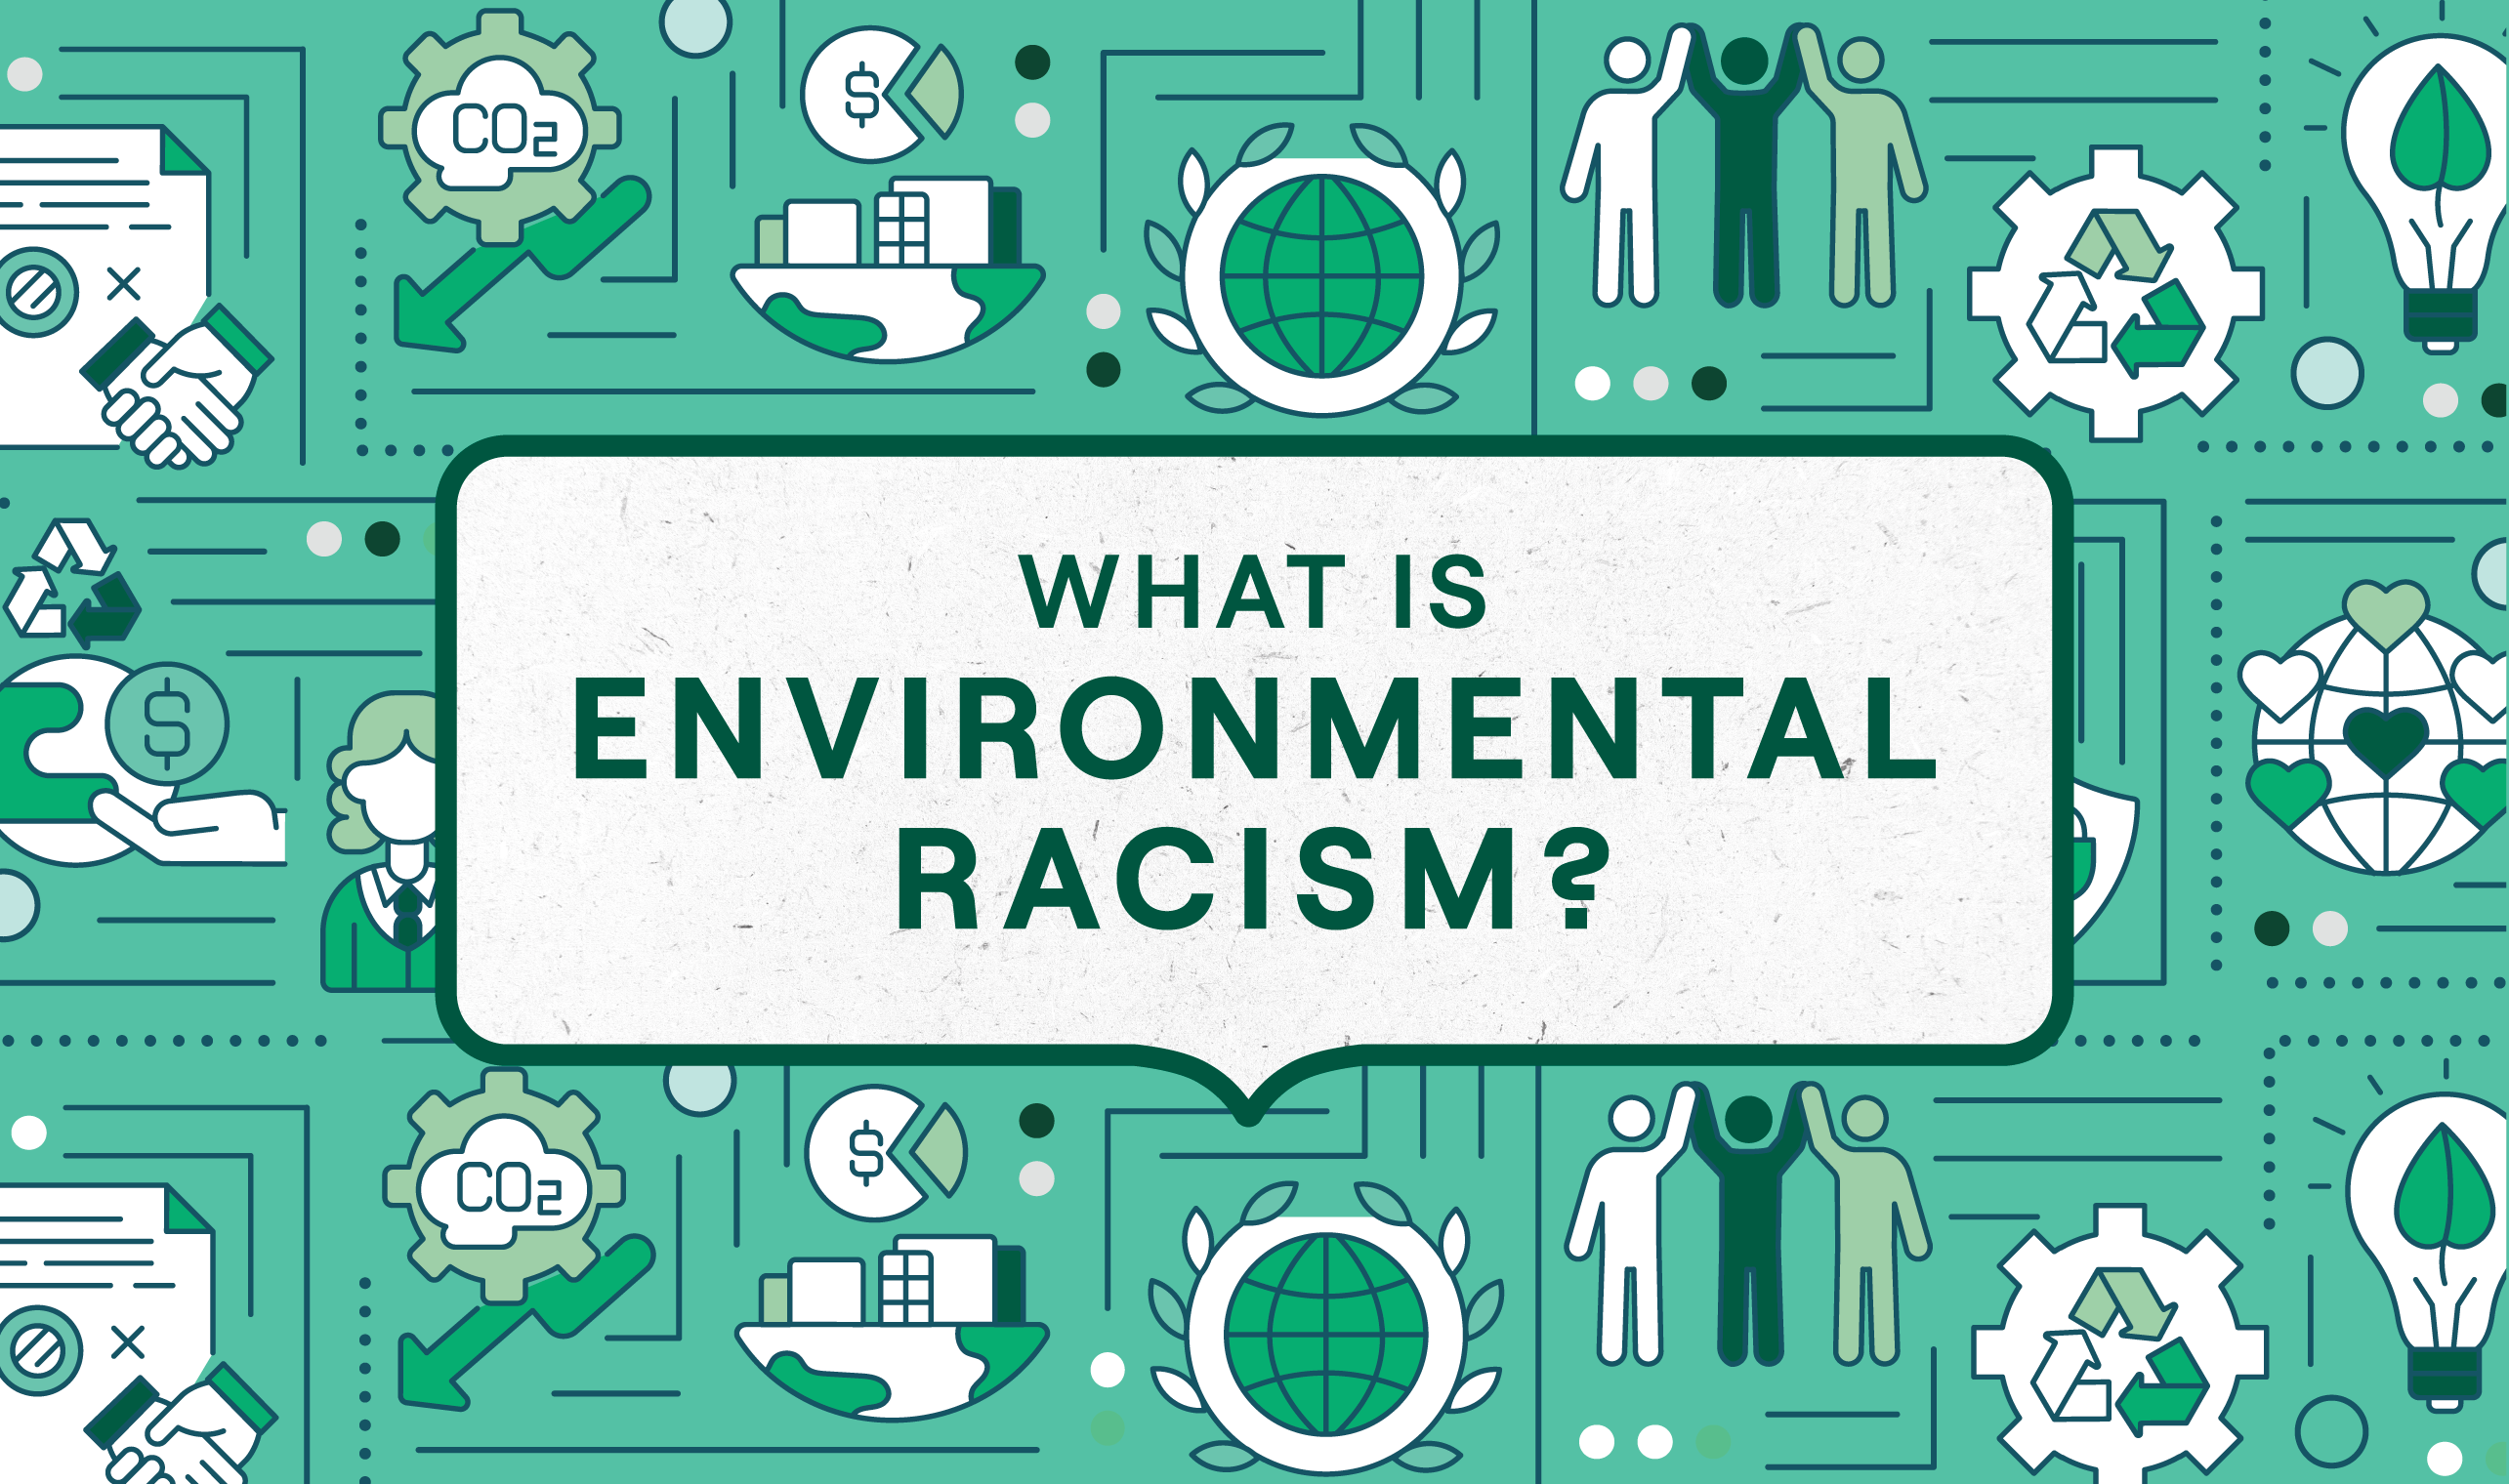 What is environmental racism?